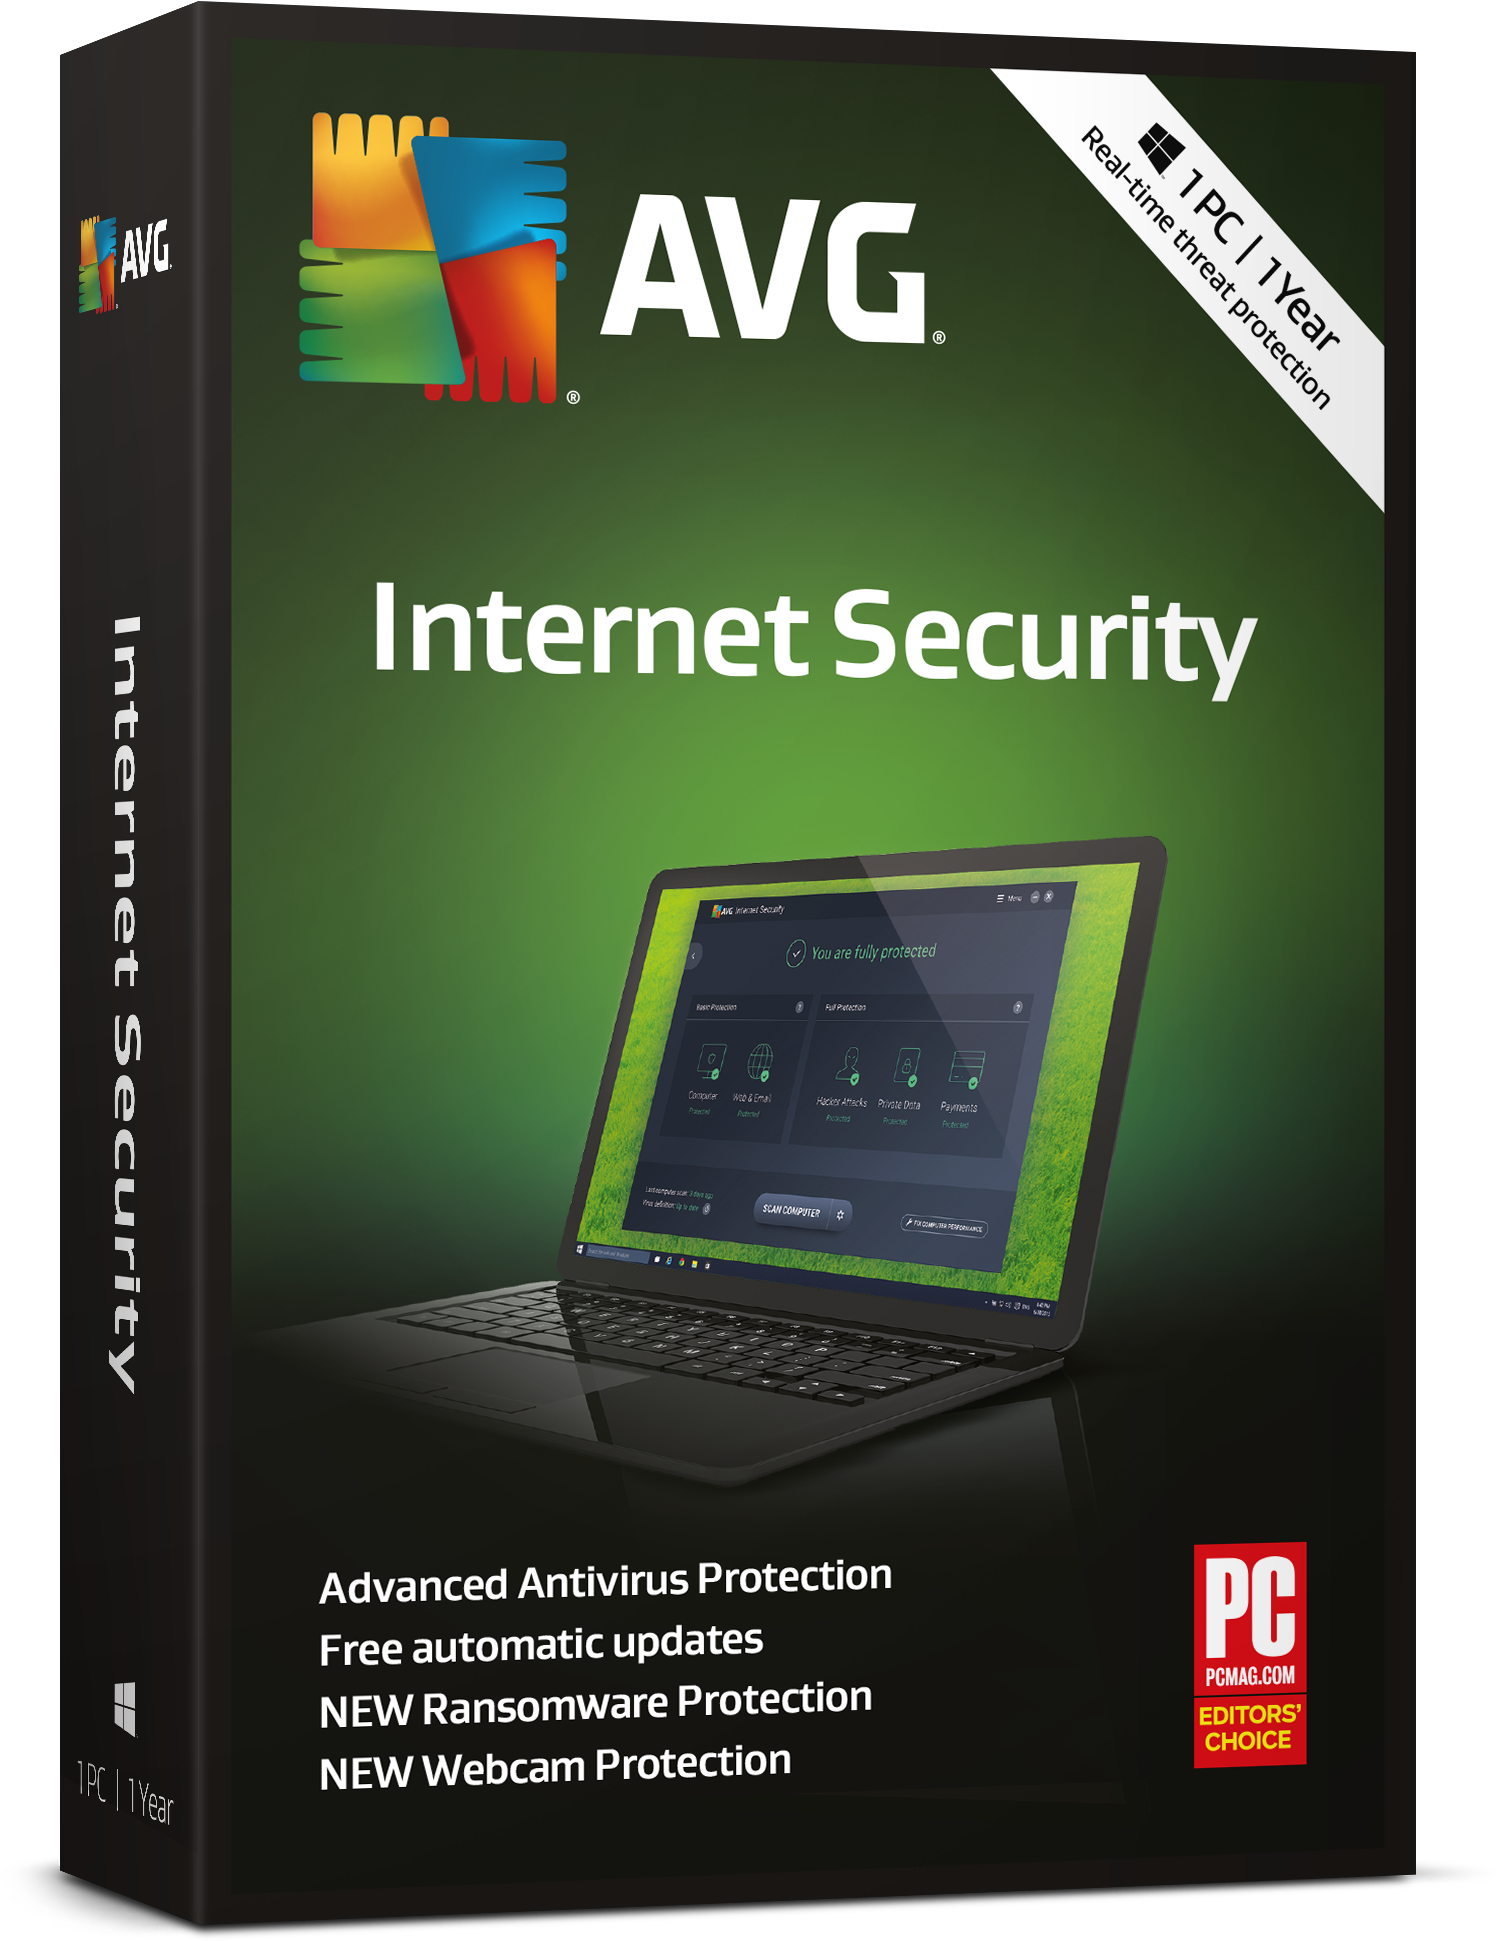 AVG Internet Security 2 Years License